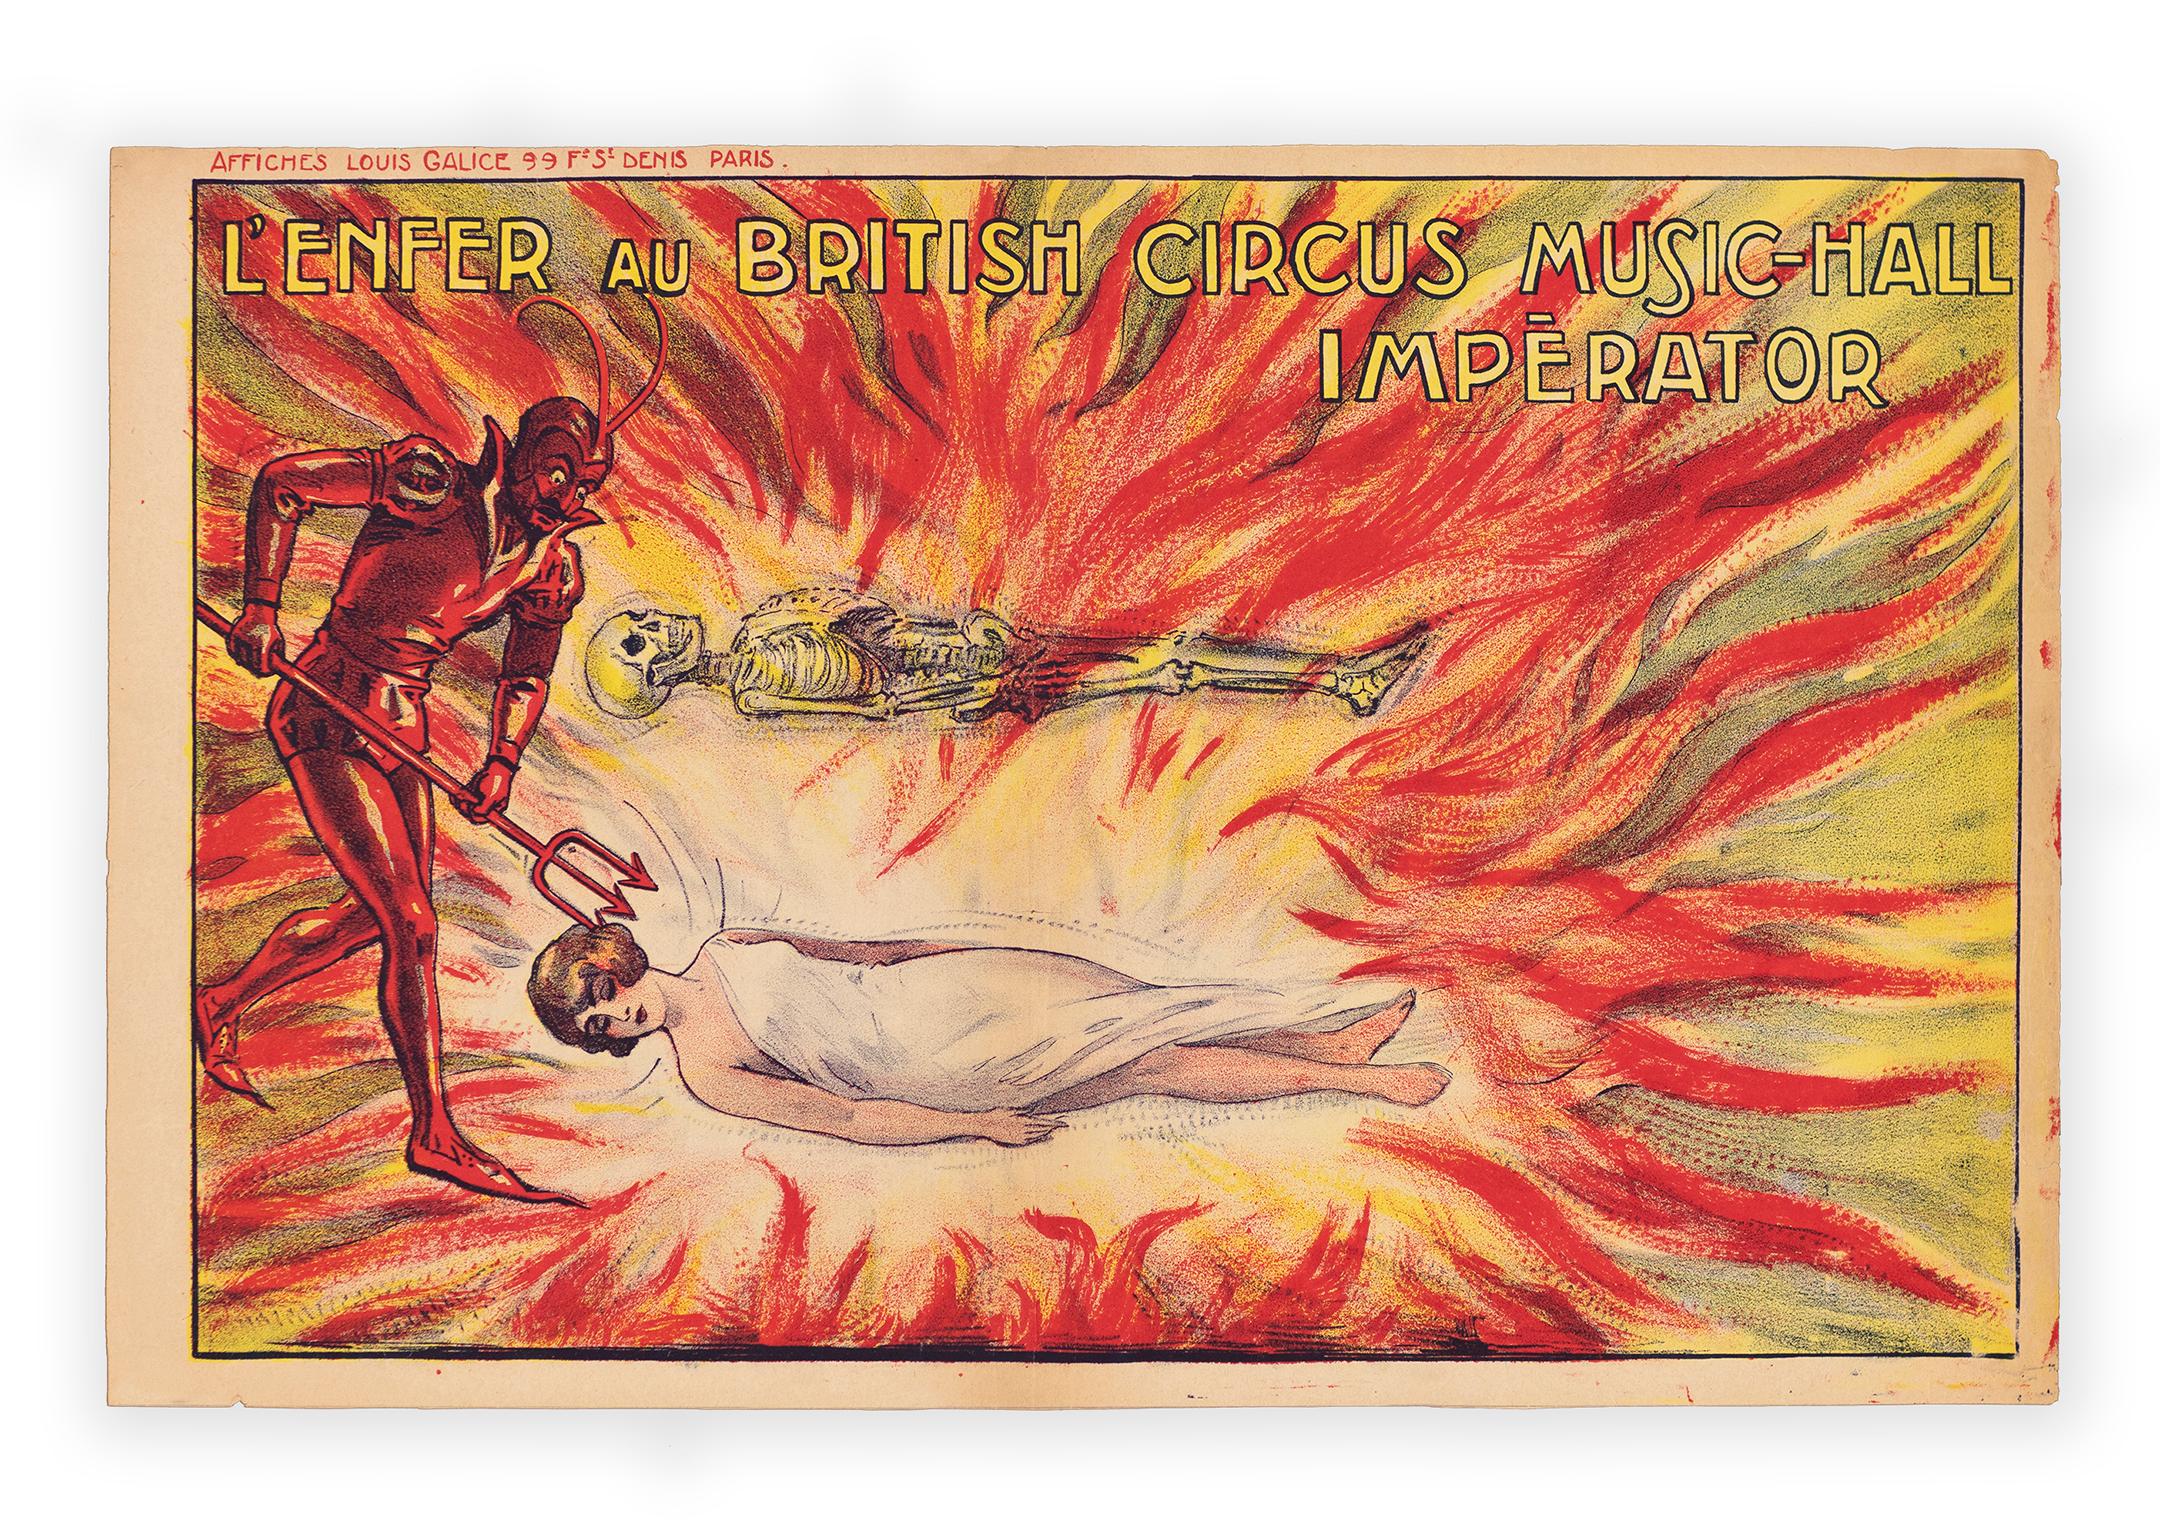 Hell at the British Circus Music-Hall Imperator, Devil magic poster c. 1915 - Print by Unknown